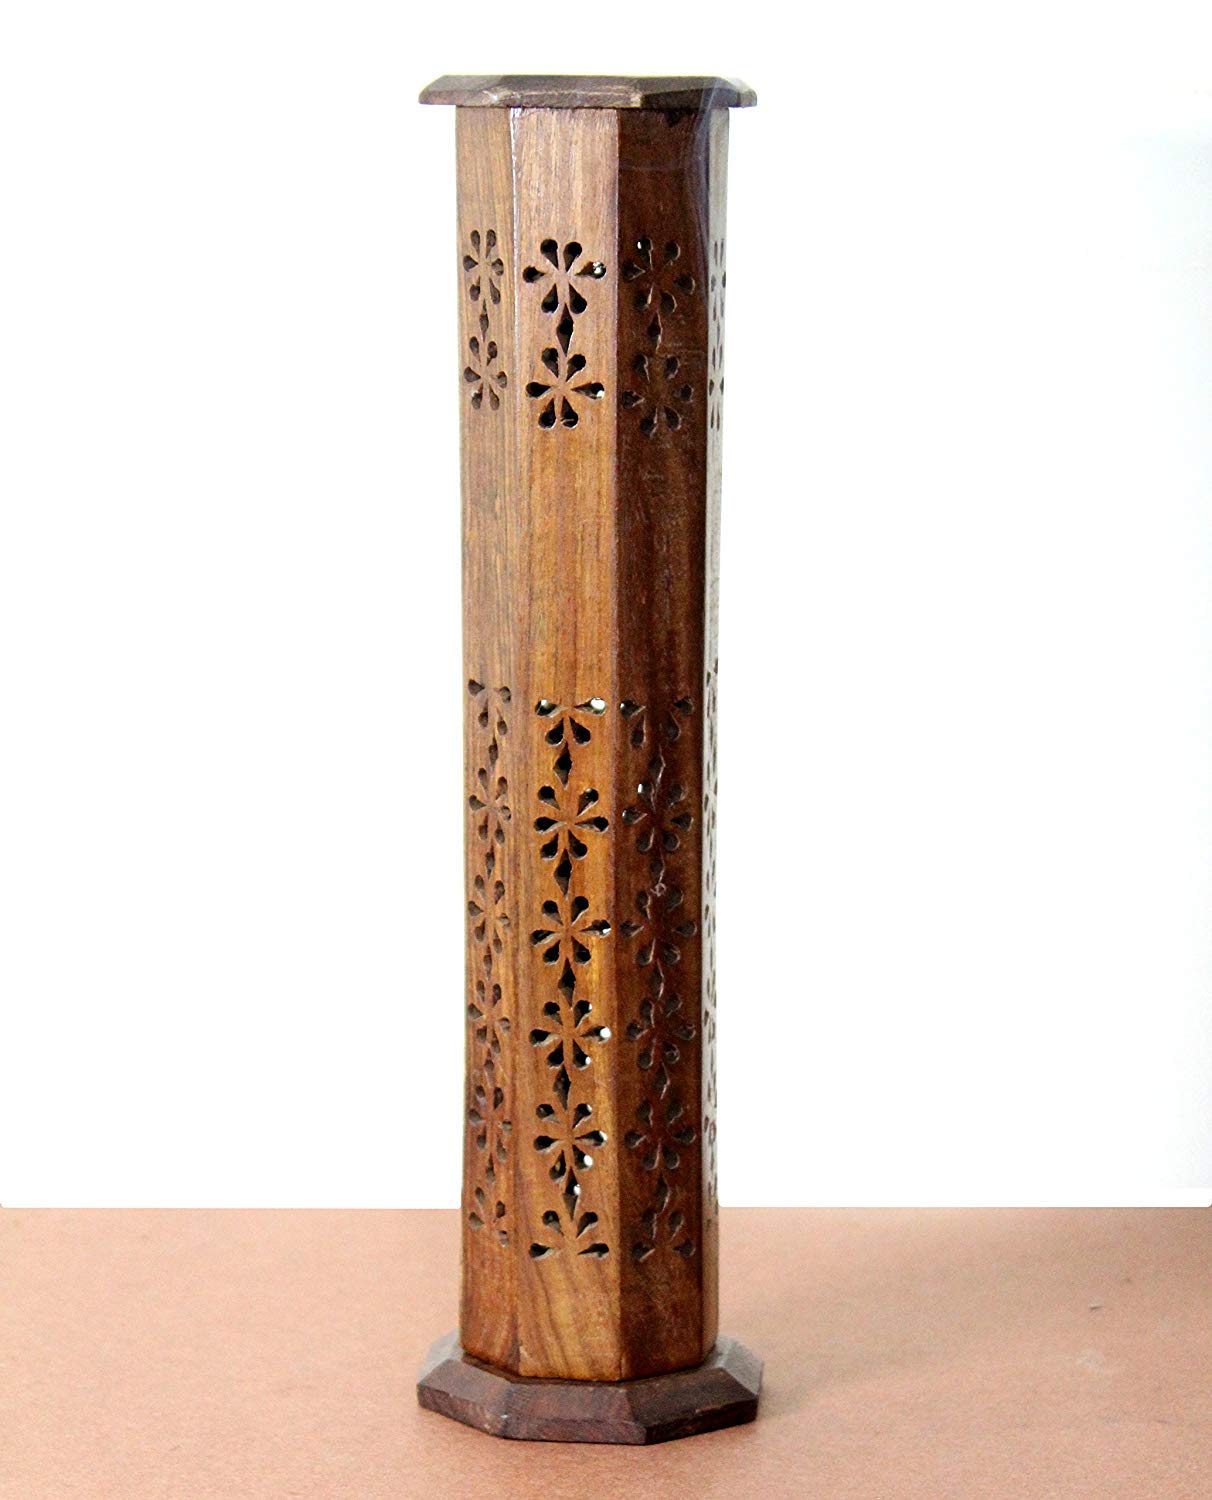 Wooden Handmade Tower Incense Holder for Temple & Home , Incense Stick Box Holder Dhoop Stand Ash Catcher Decorative Handicraft Gift Dime Store